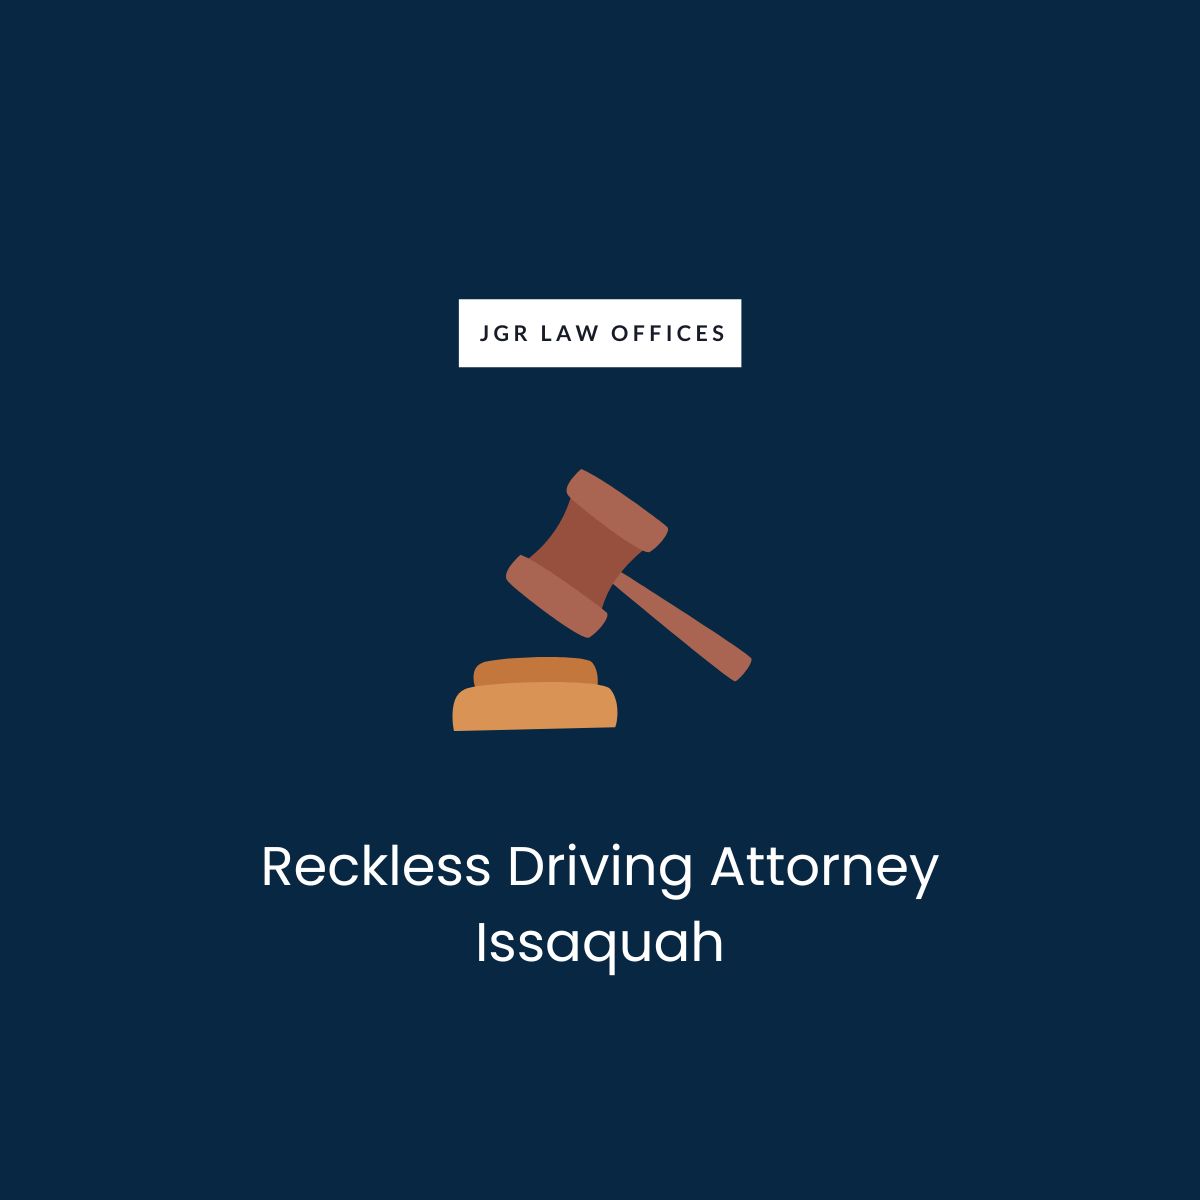 Reckless Driving Attorney Issaquah